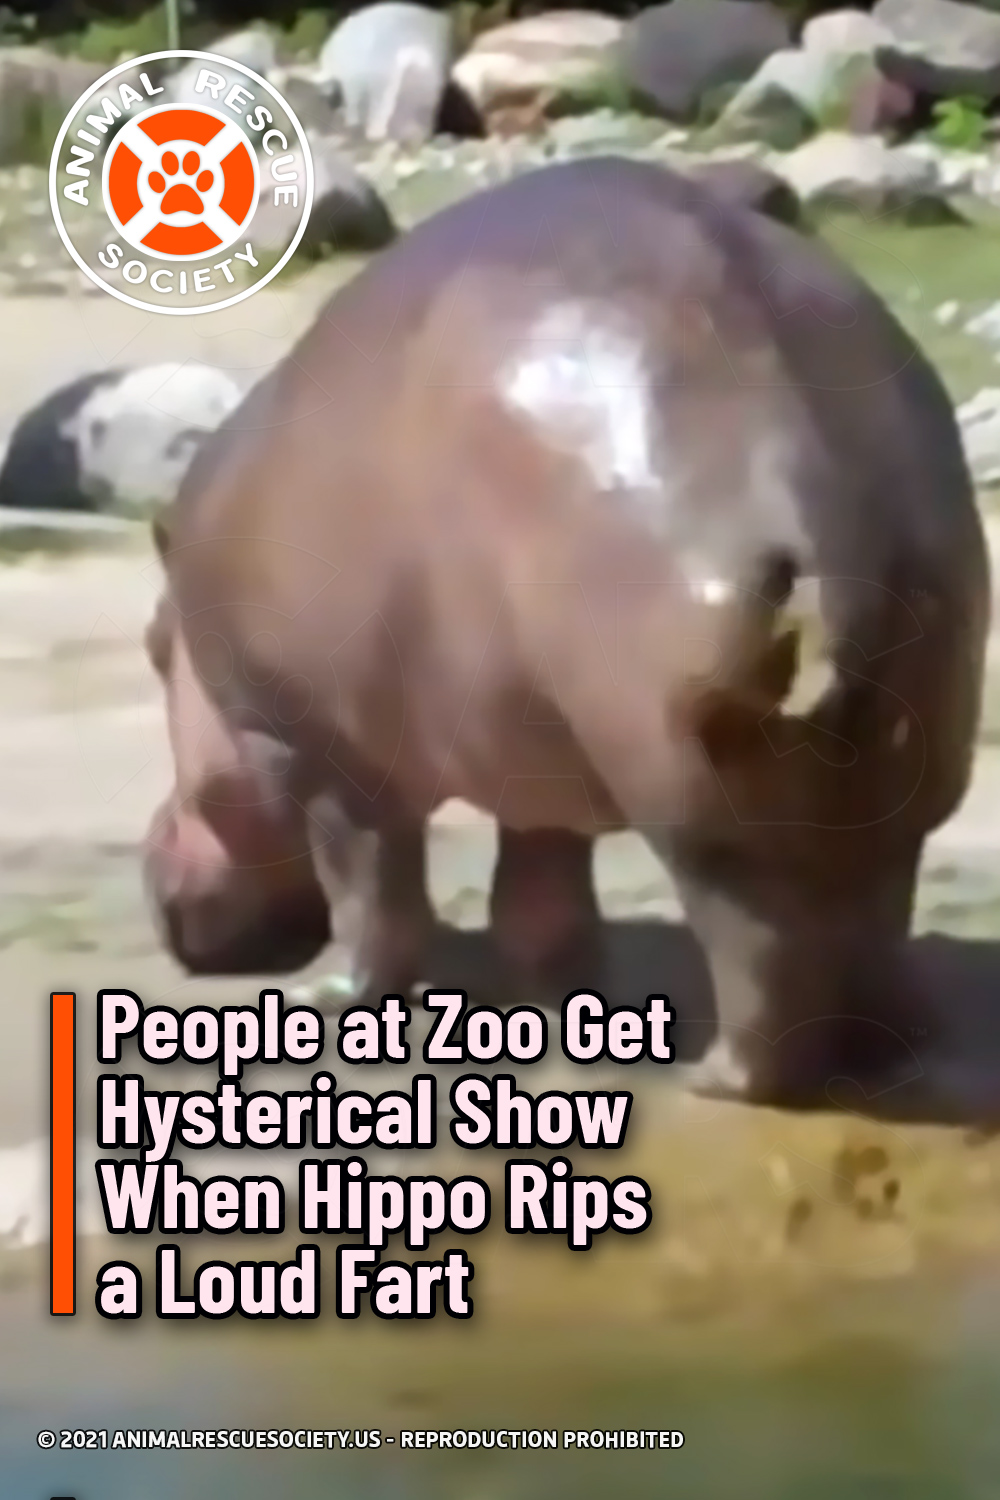 People at Zoo Get Hysterical Show When Hippo Rips a Loud Fart